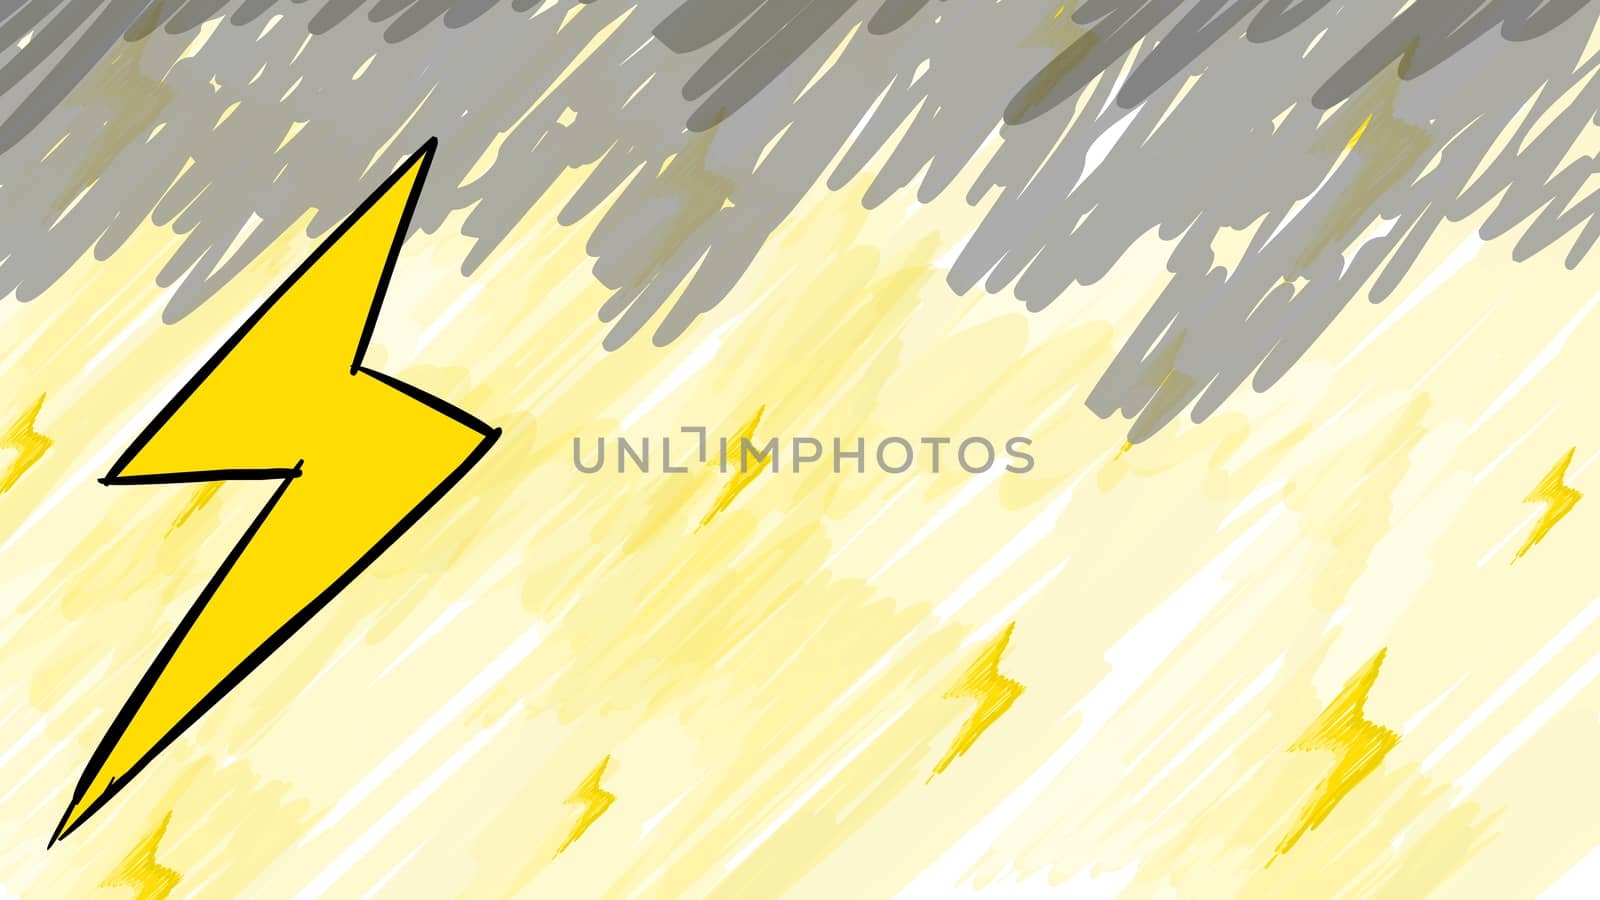 Background lightning Cartoon Sketch Drawing Style with clouds white background. electric, yellow, power, electric, Thunder, Storm, Flash, light, storm, tempest